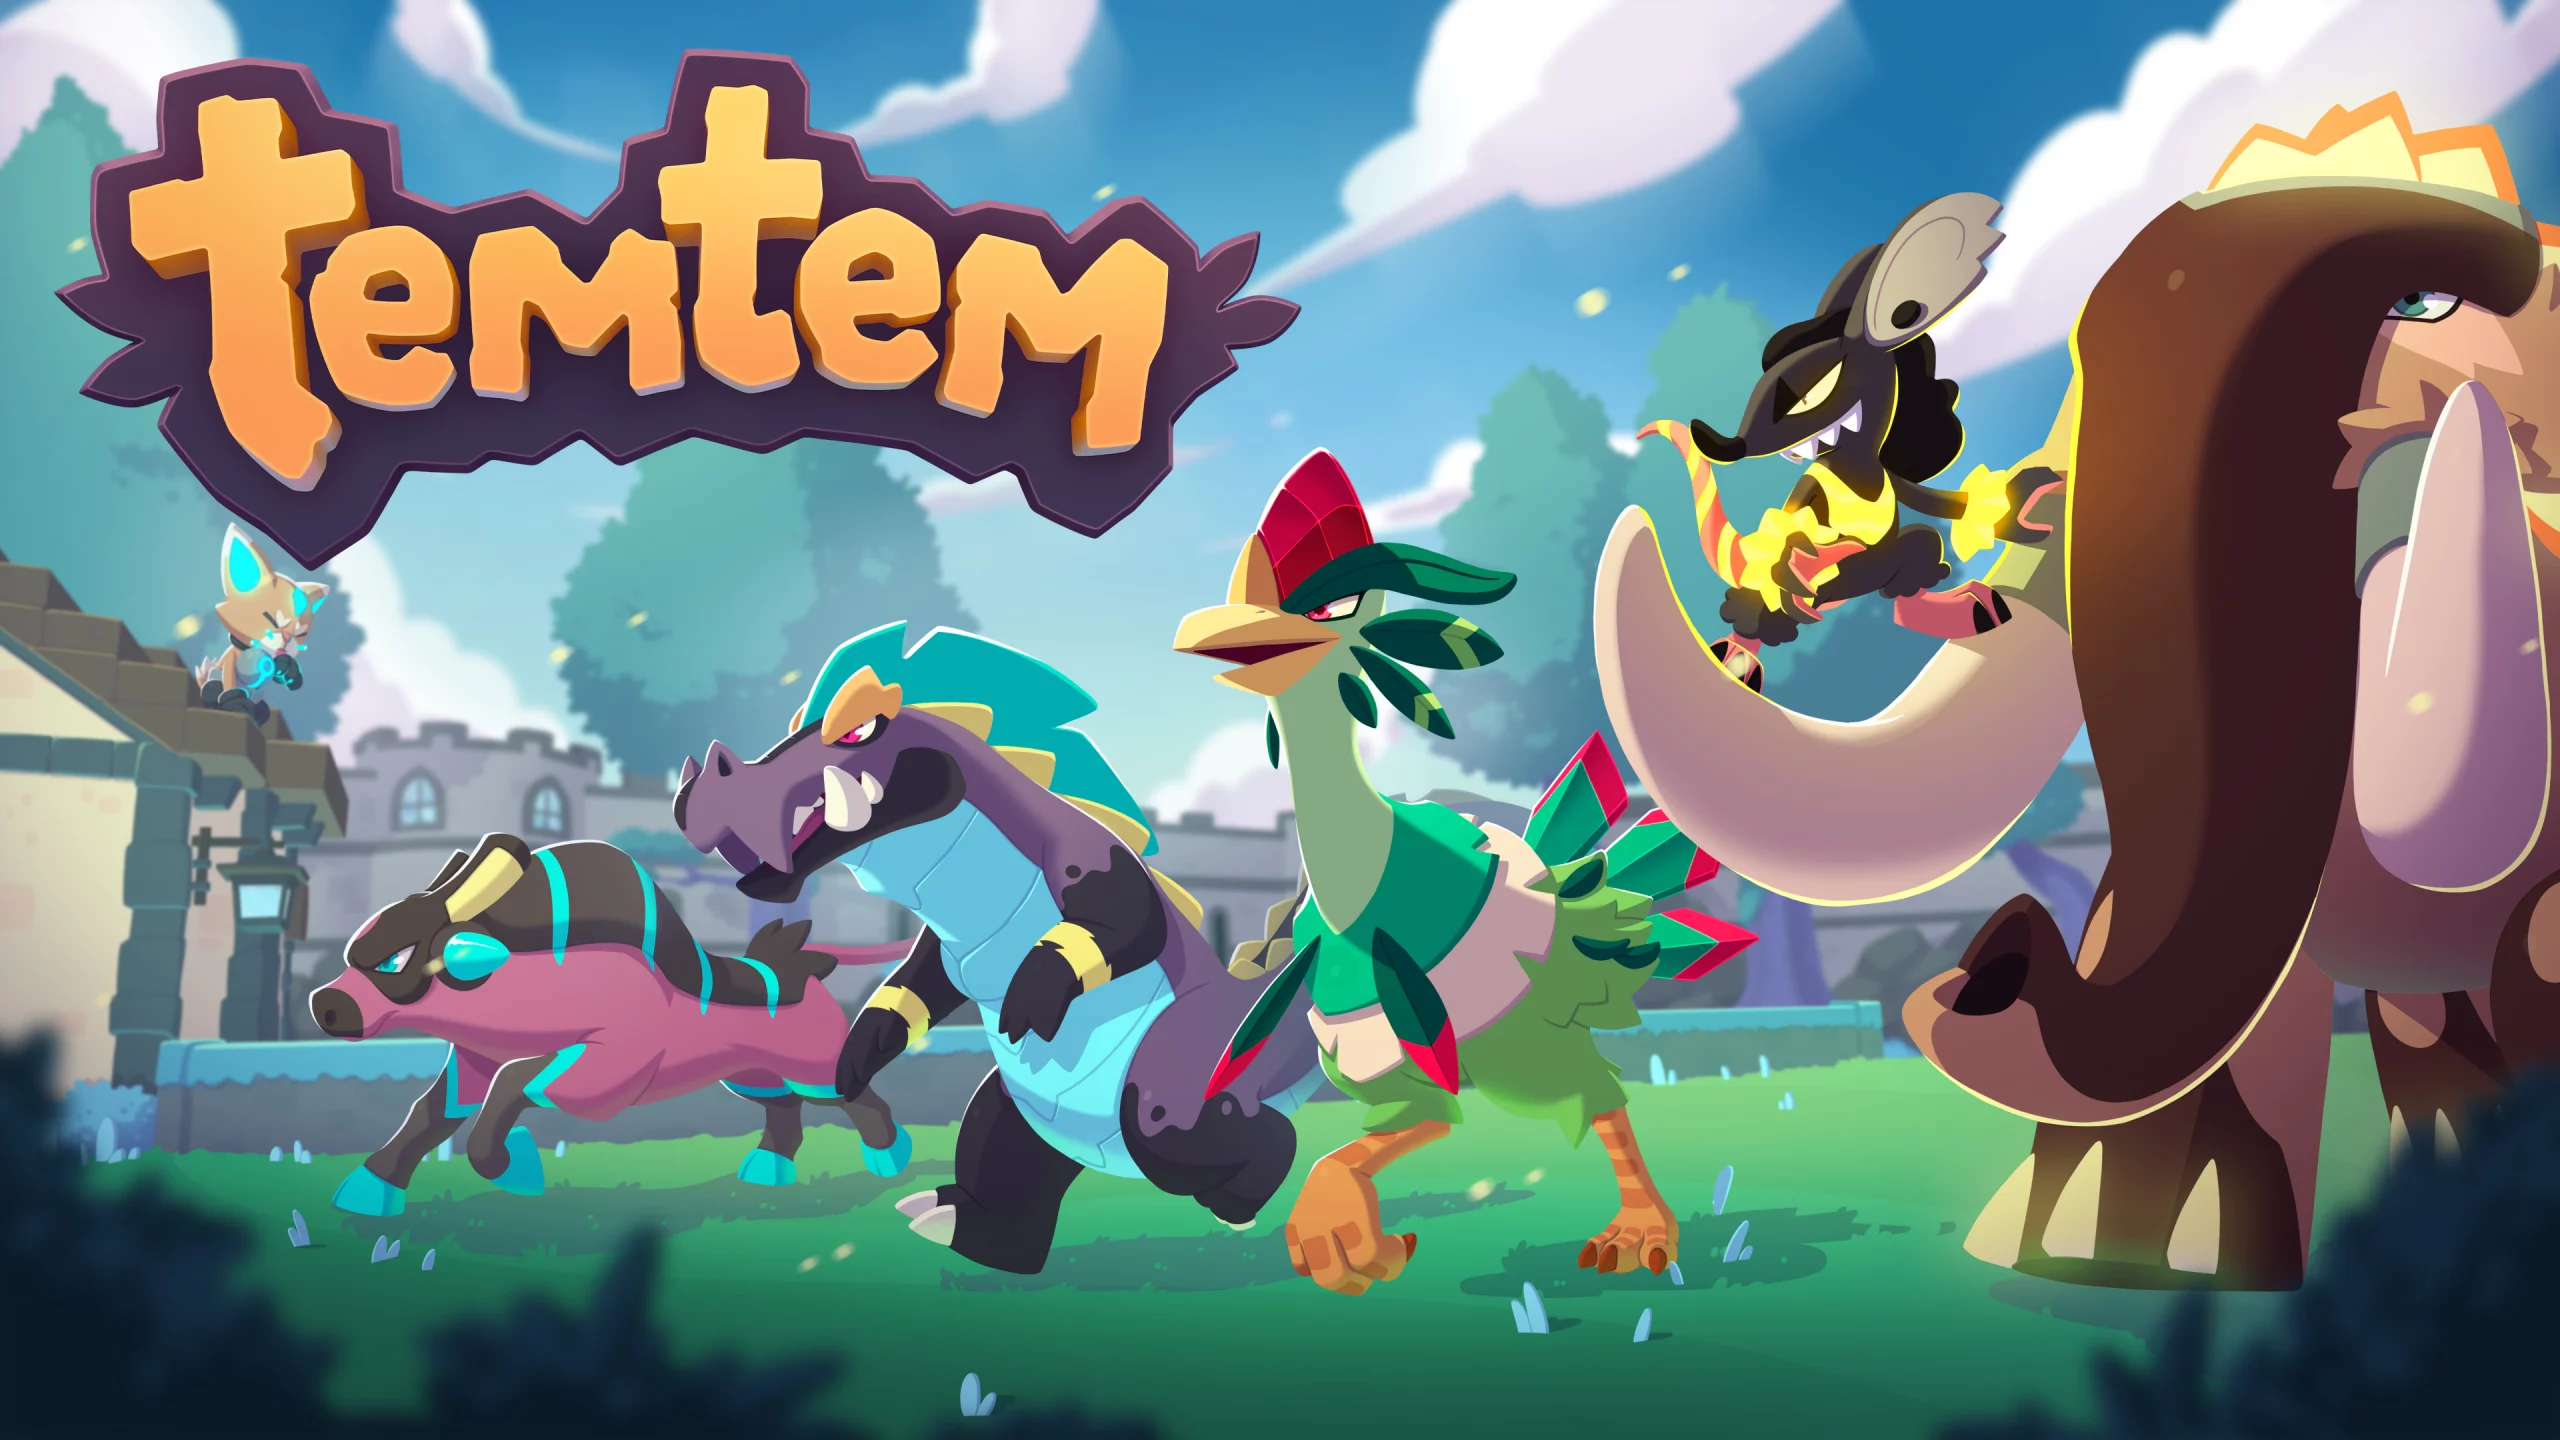 After two years in Early Access, Temtem 1.0 is finally here